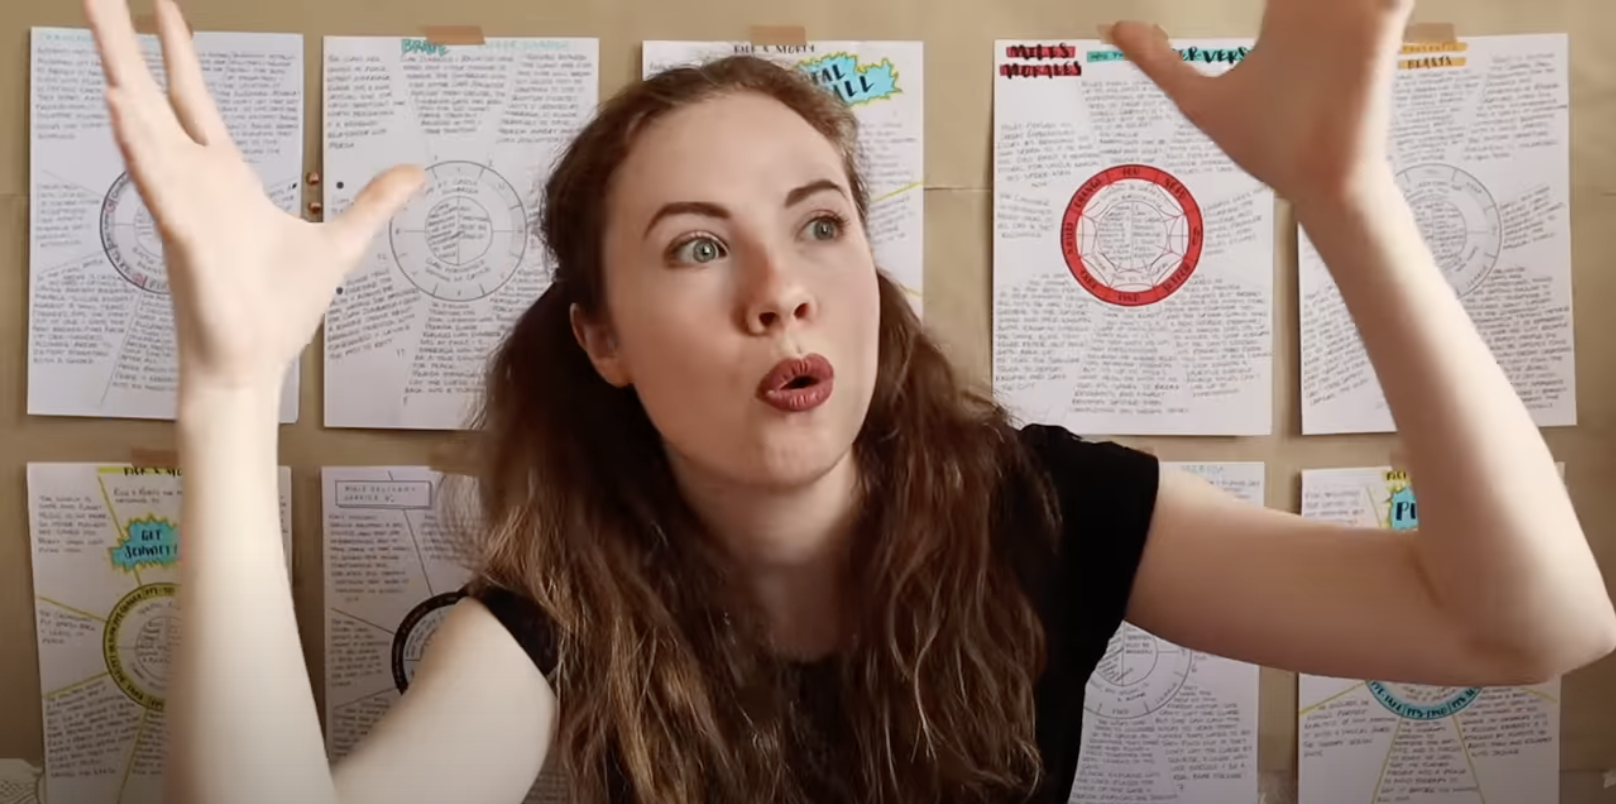 Thumbnail of Rachael Stephen video with her in front of a corkboard with several "plot embryo" papers pinned to it. Rachael with arms lifted after making a "pshew" sound for "mind blown" from video.